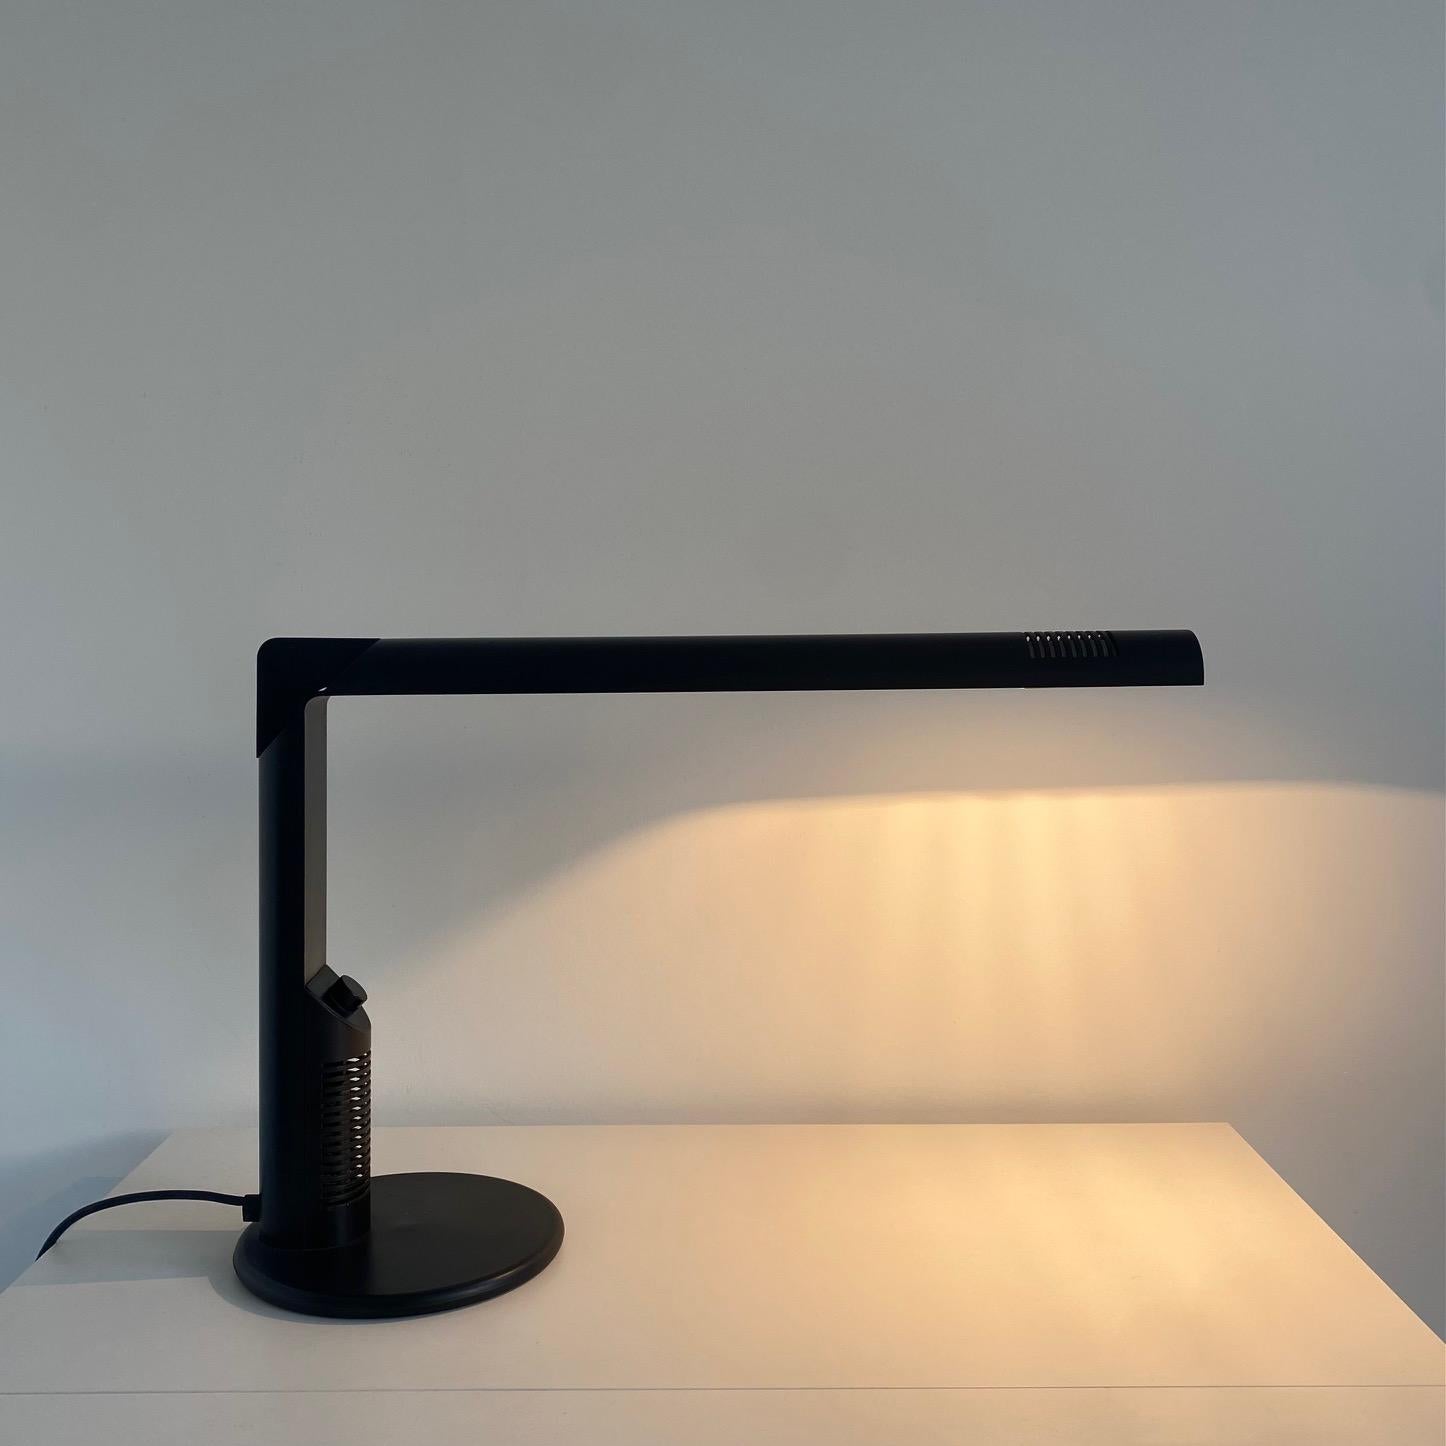 Abele table lamp by Gianfranco Frattini for Luci, Italy 1979

Matt black lamp with intensity variator, black metal structure and base.

Totally functional ! good condition.